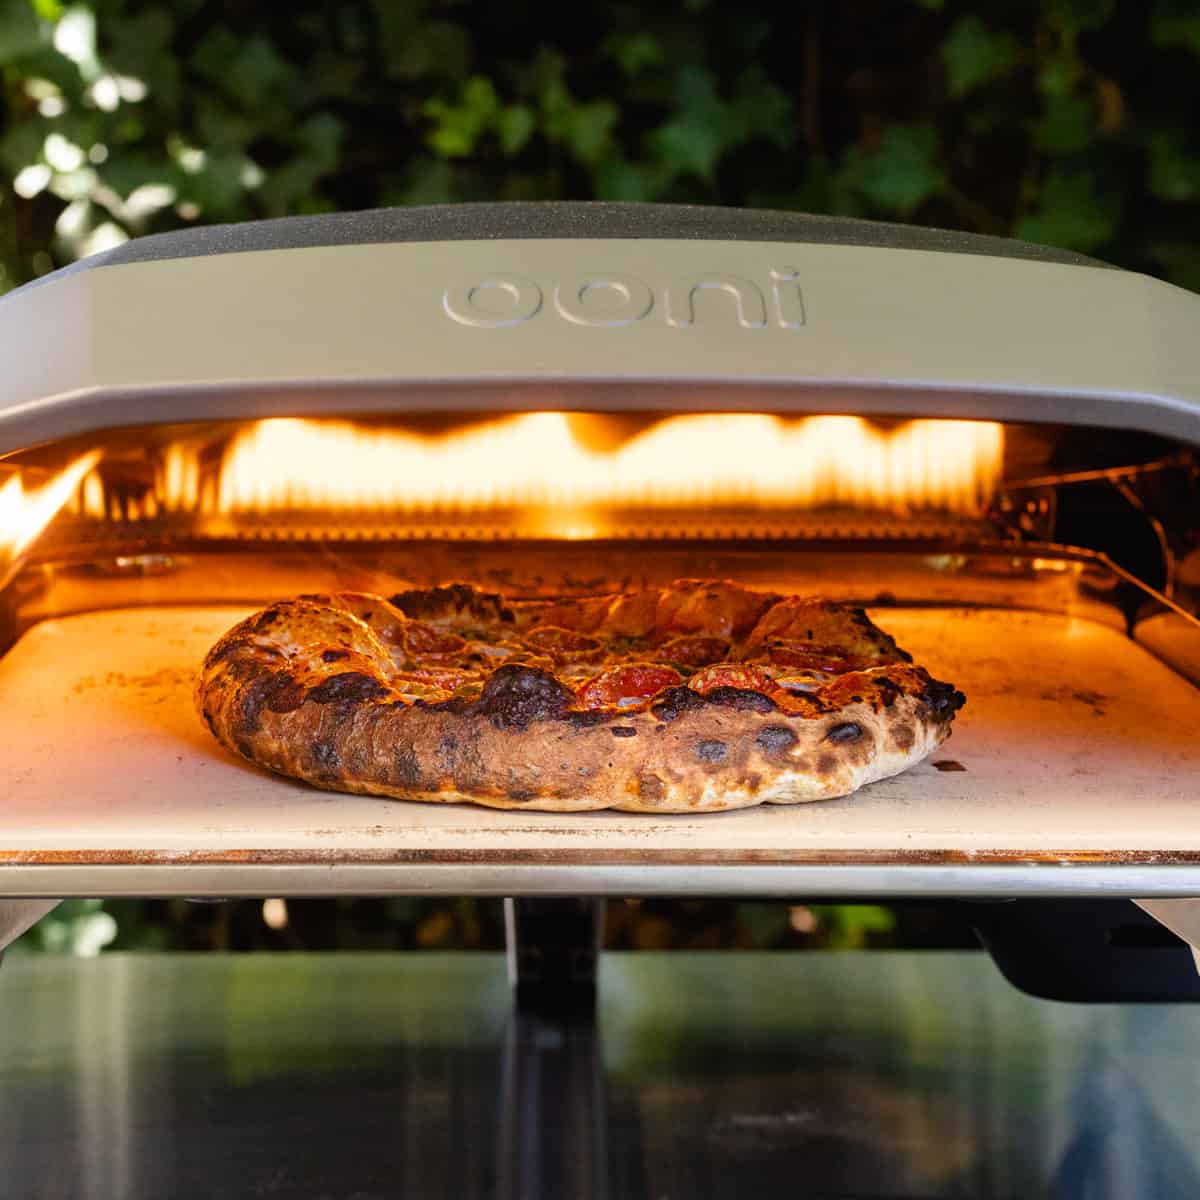 Wood Burning Pizza Oven, PIZZE 4